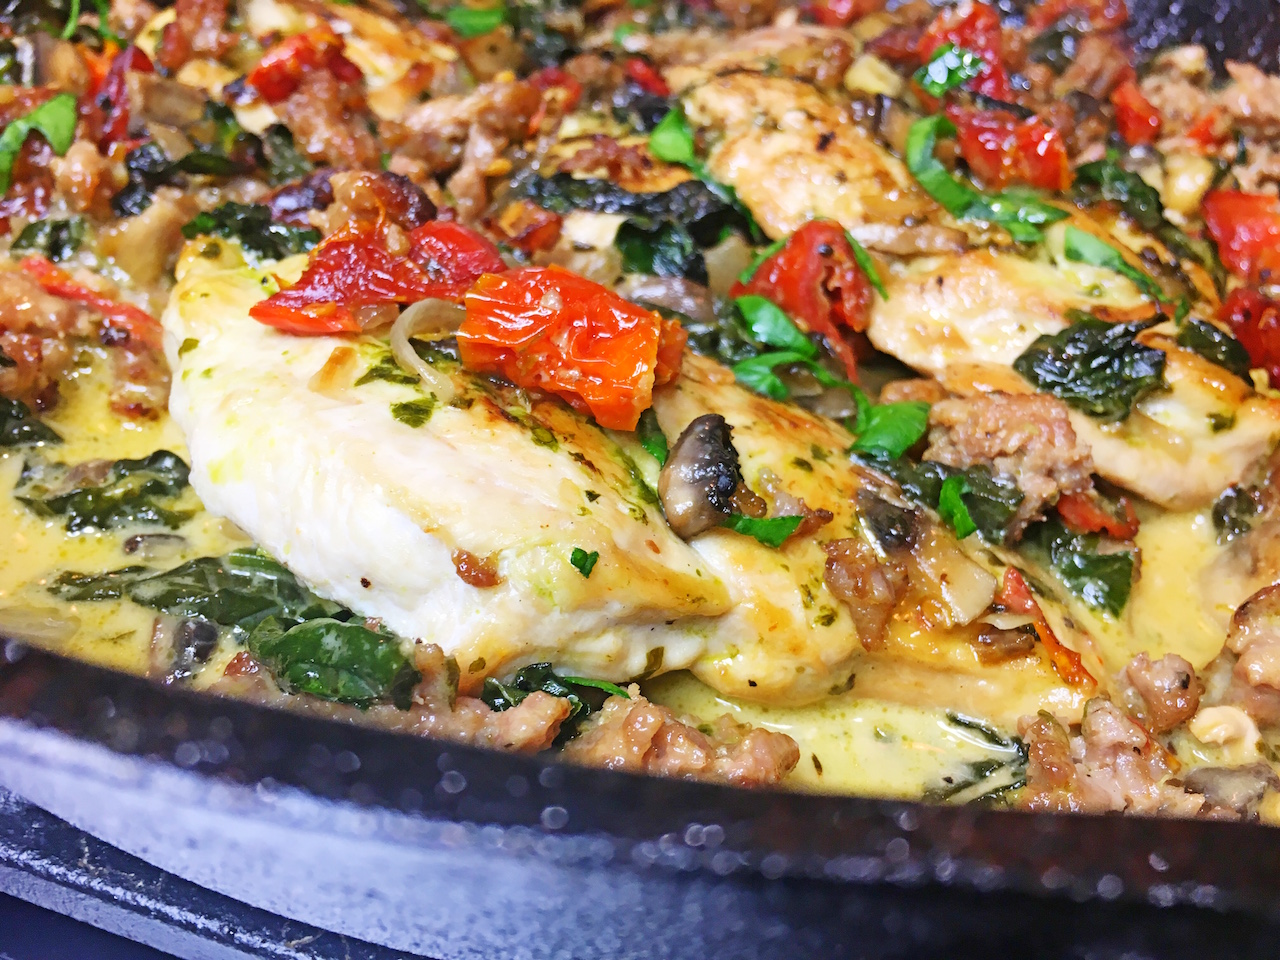 Skillet Chicken with Sausage, Sun Dried Tomatoes, Mushrooms and Spinach